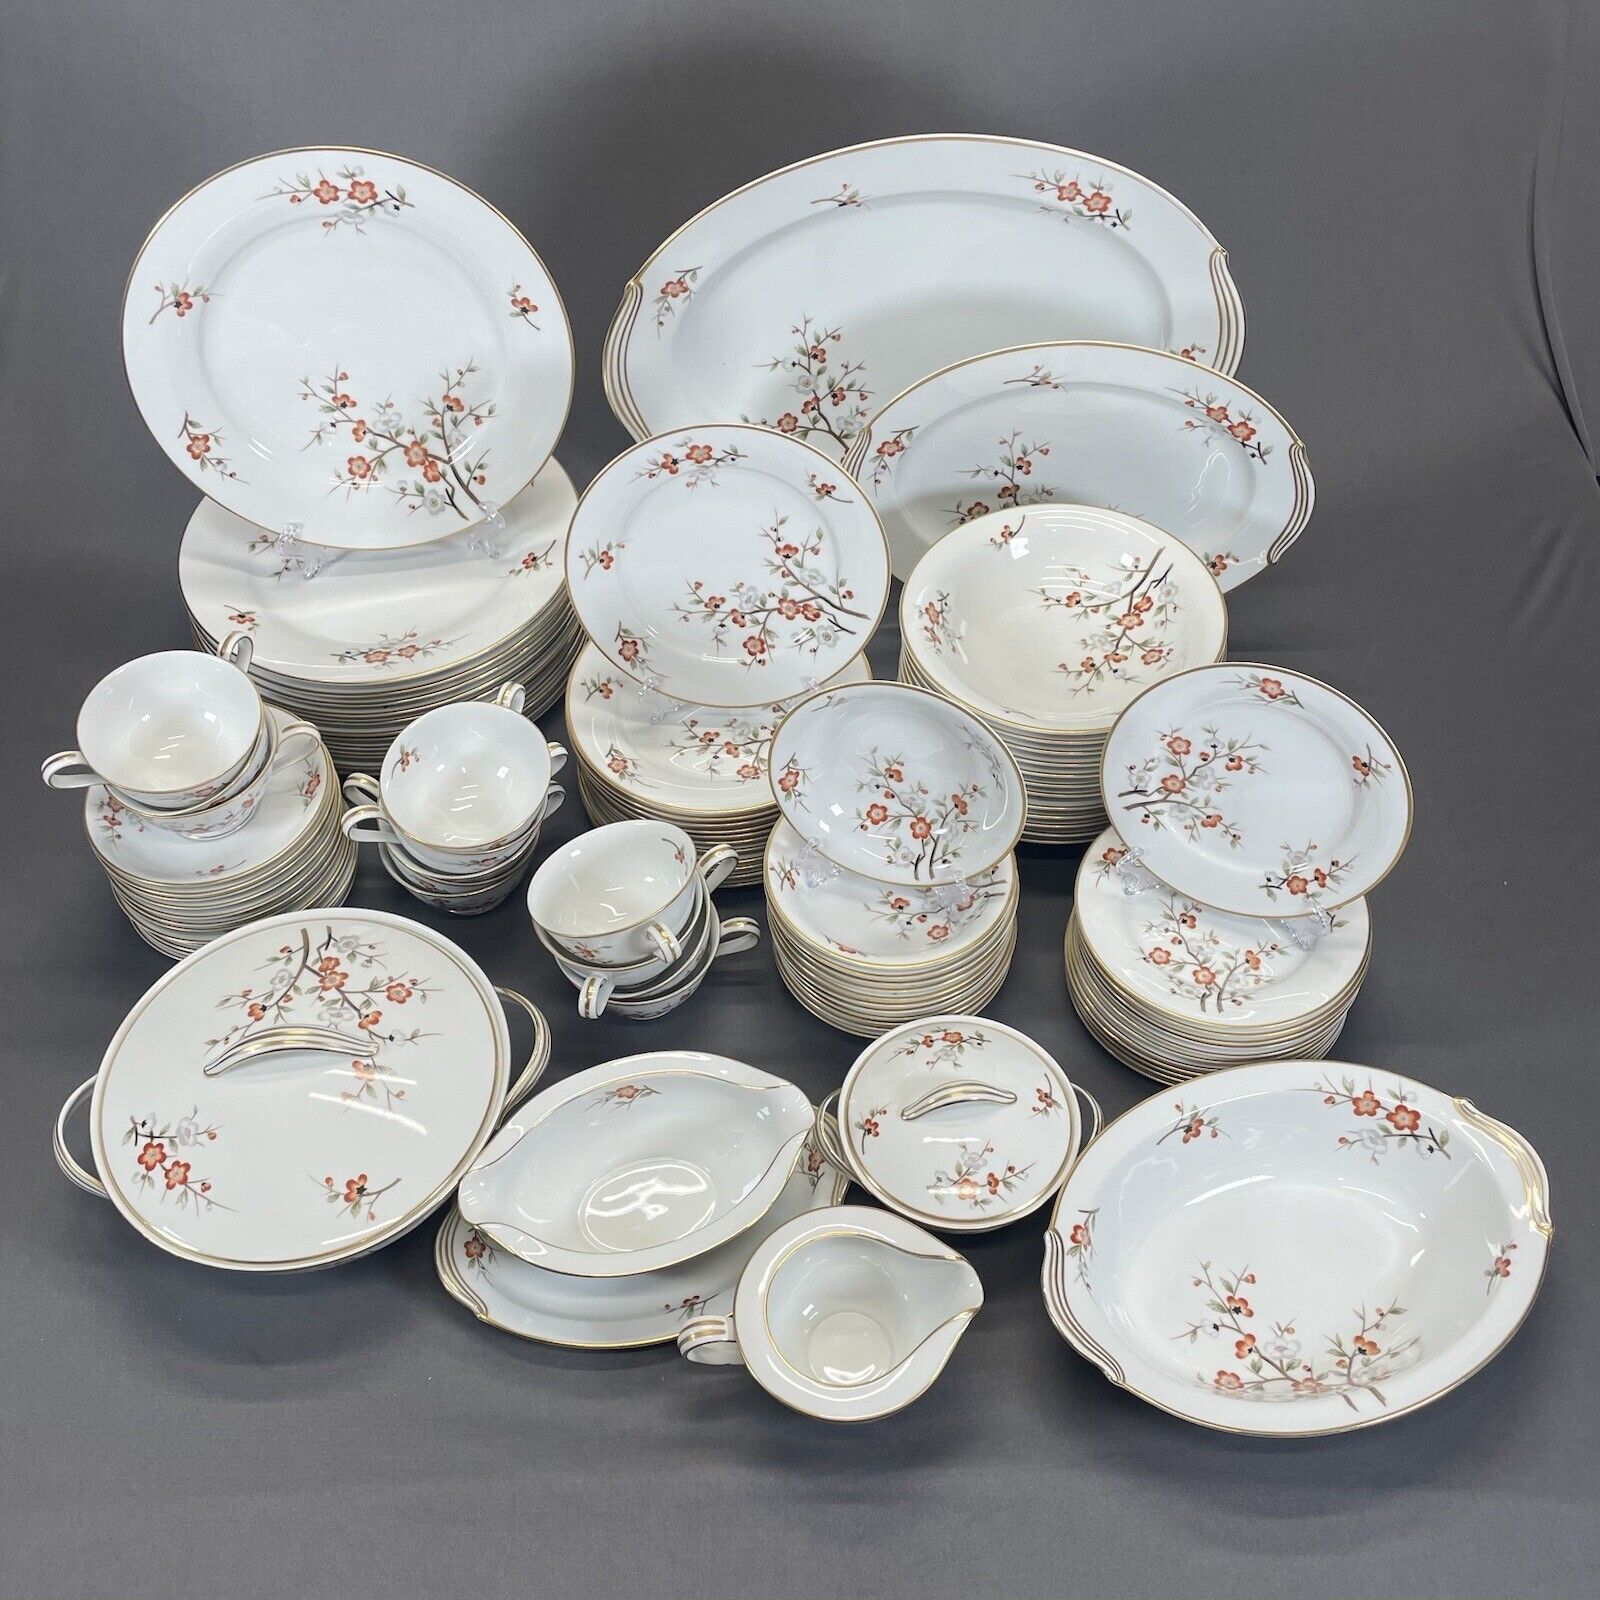 Noritake 5329 Dinnerware Set 91 Piece Service for 12 and Serving Pieces \